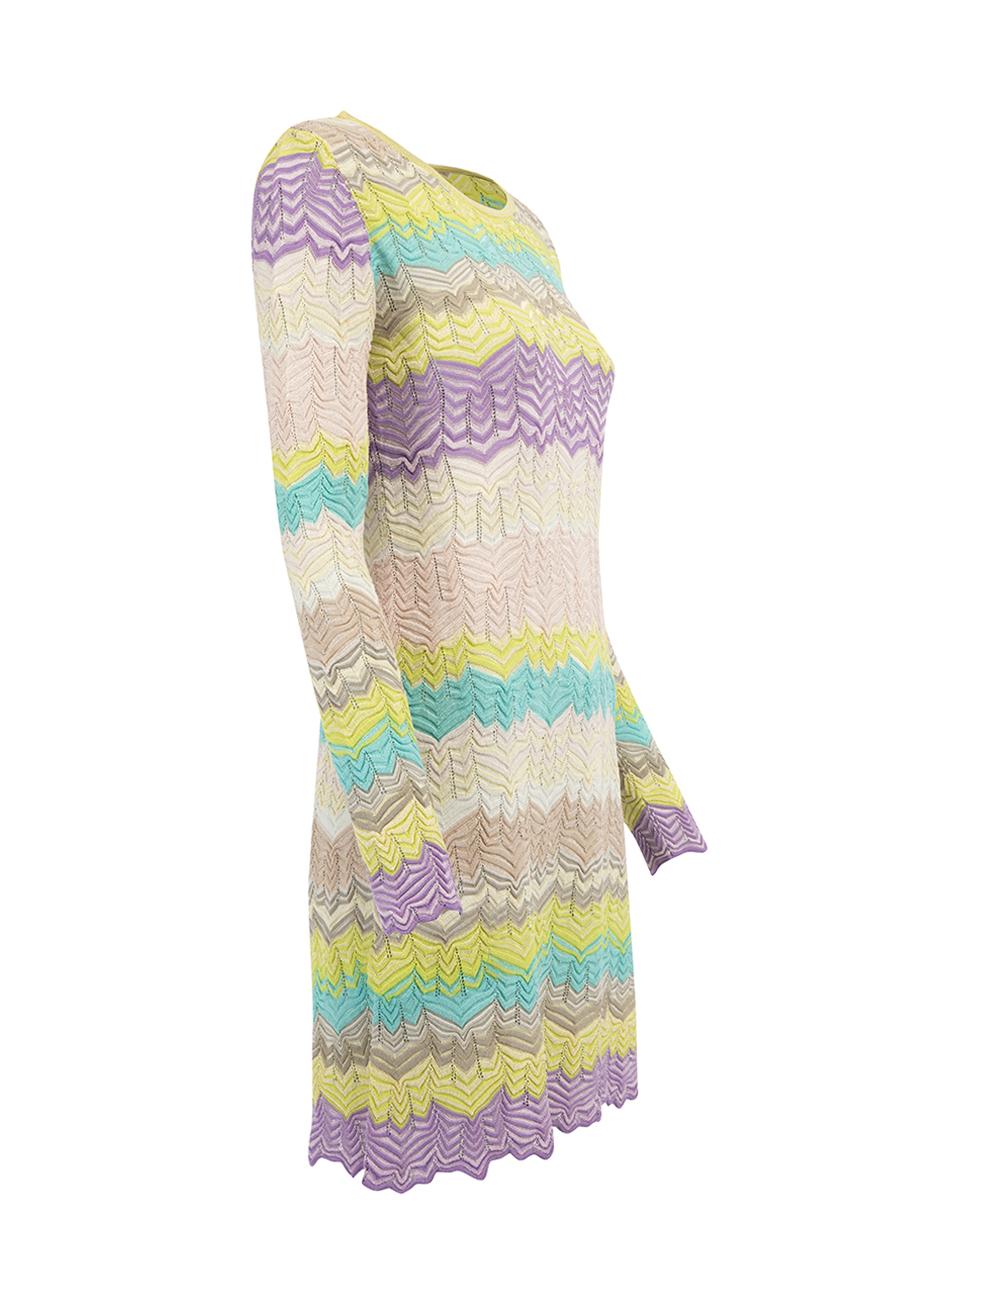 CONDITION is Never Worn. No visible wear to dress is evident on this used Missoni designer resale item. Details Multicolour- Yellow, white and purple Cotton and viscose blend Mini dress Abstract pattern Long sleeves Round neckline Made in Italy